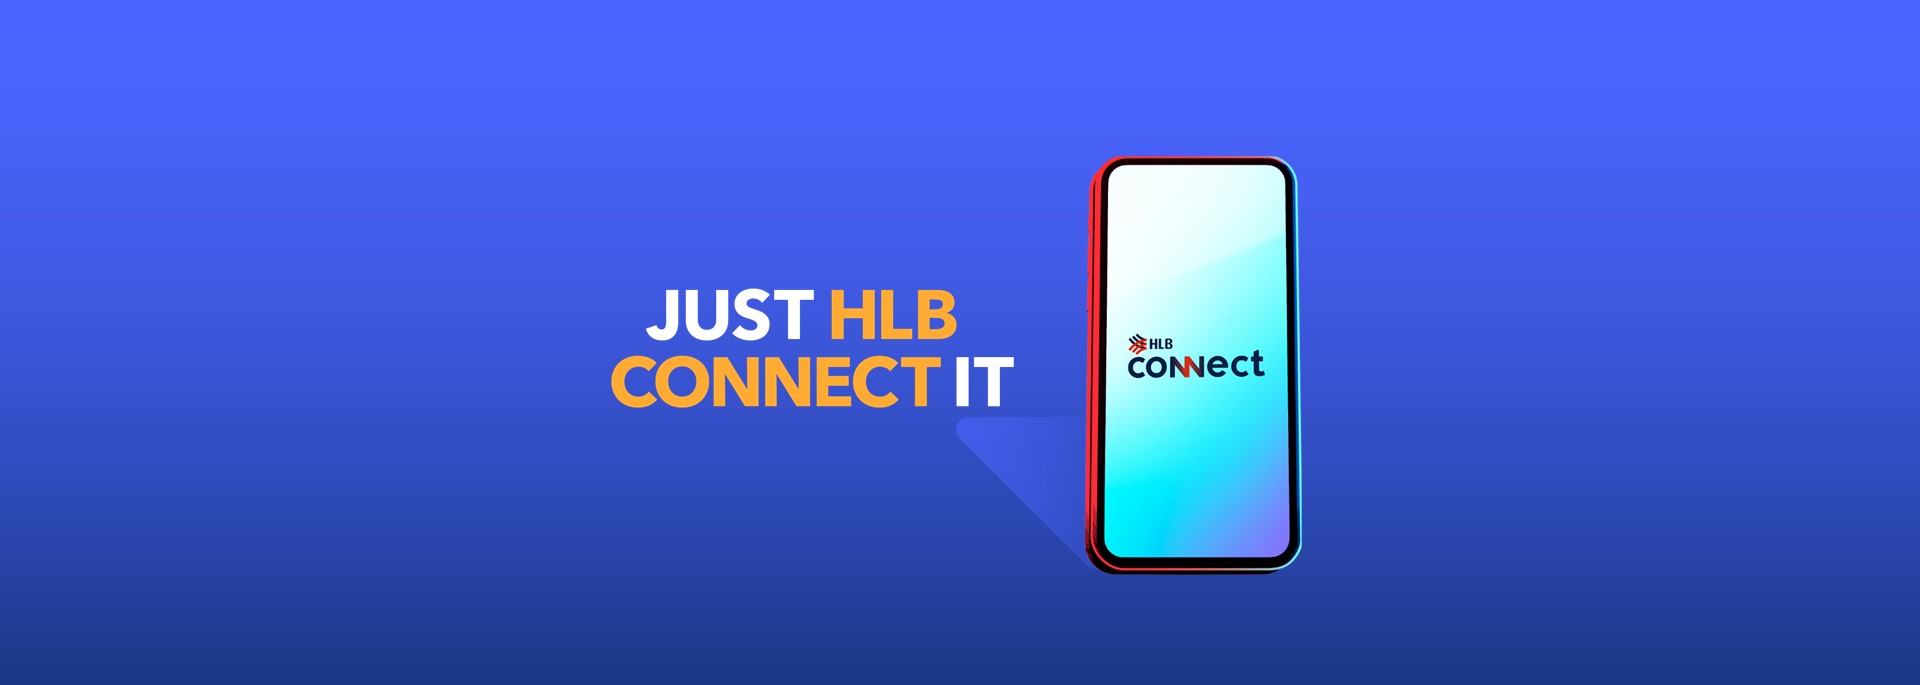 HLB Connect Day 2022 Promotions